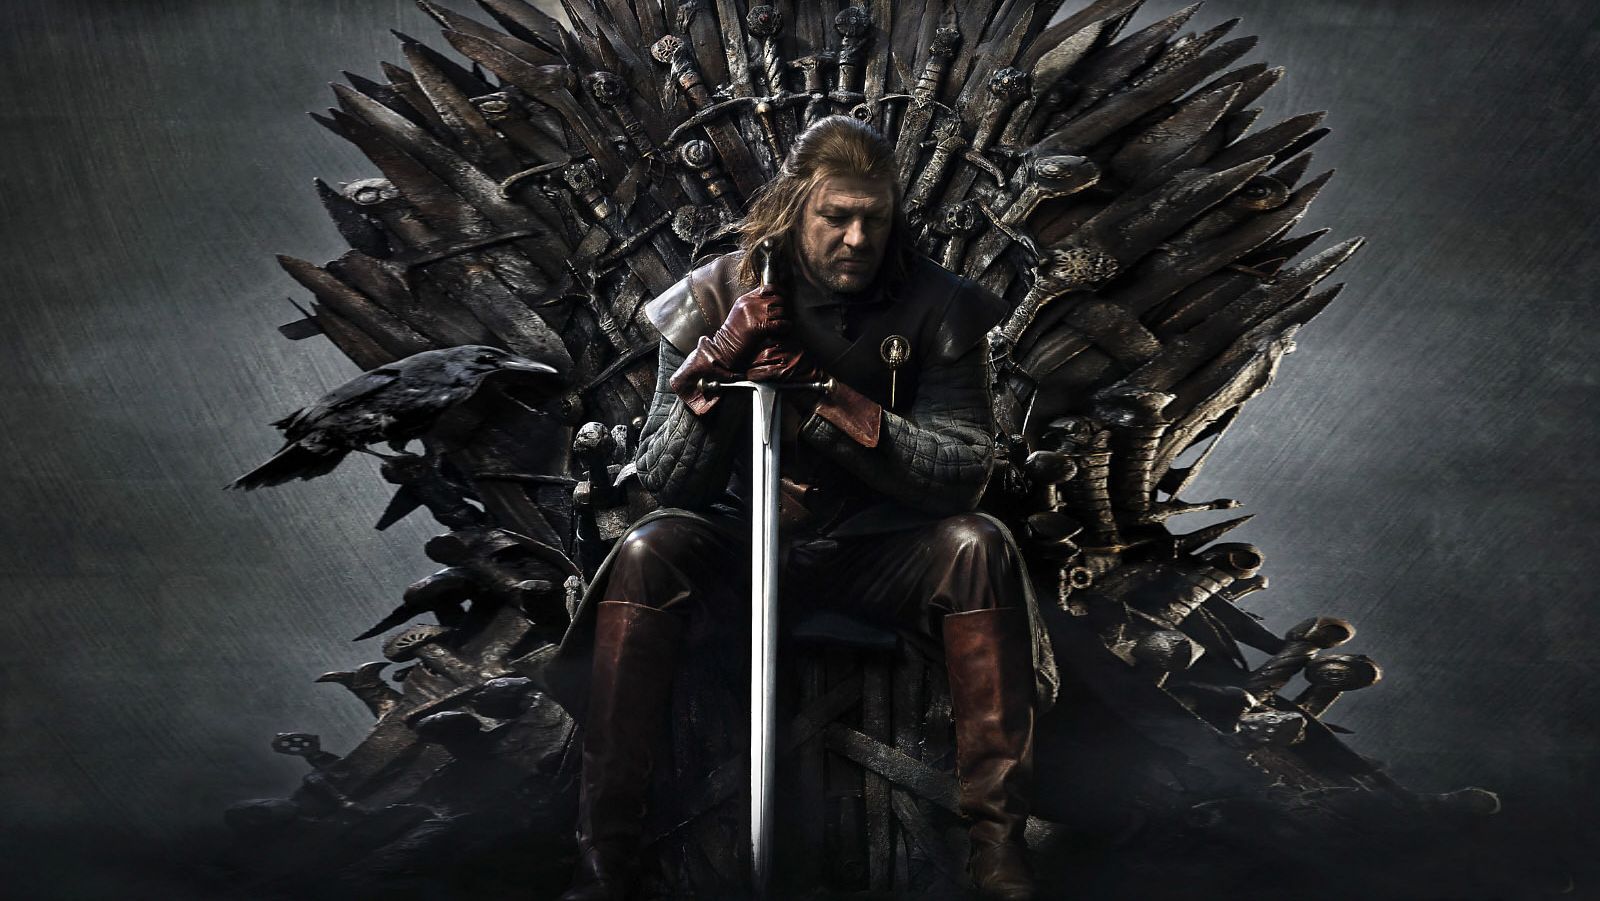 Game of Thrones comes to China as Tencent ties up with HBO